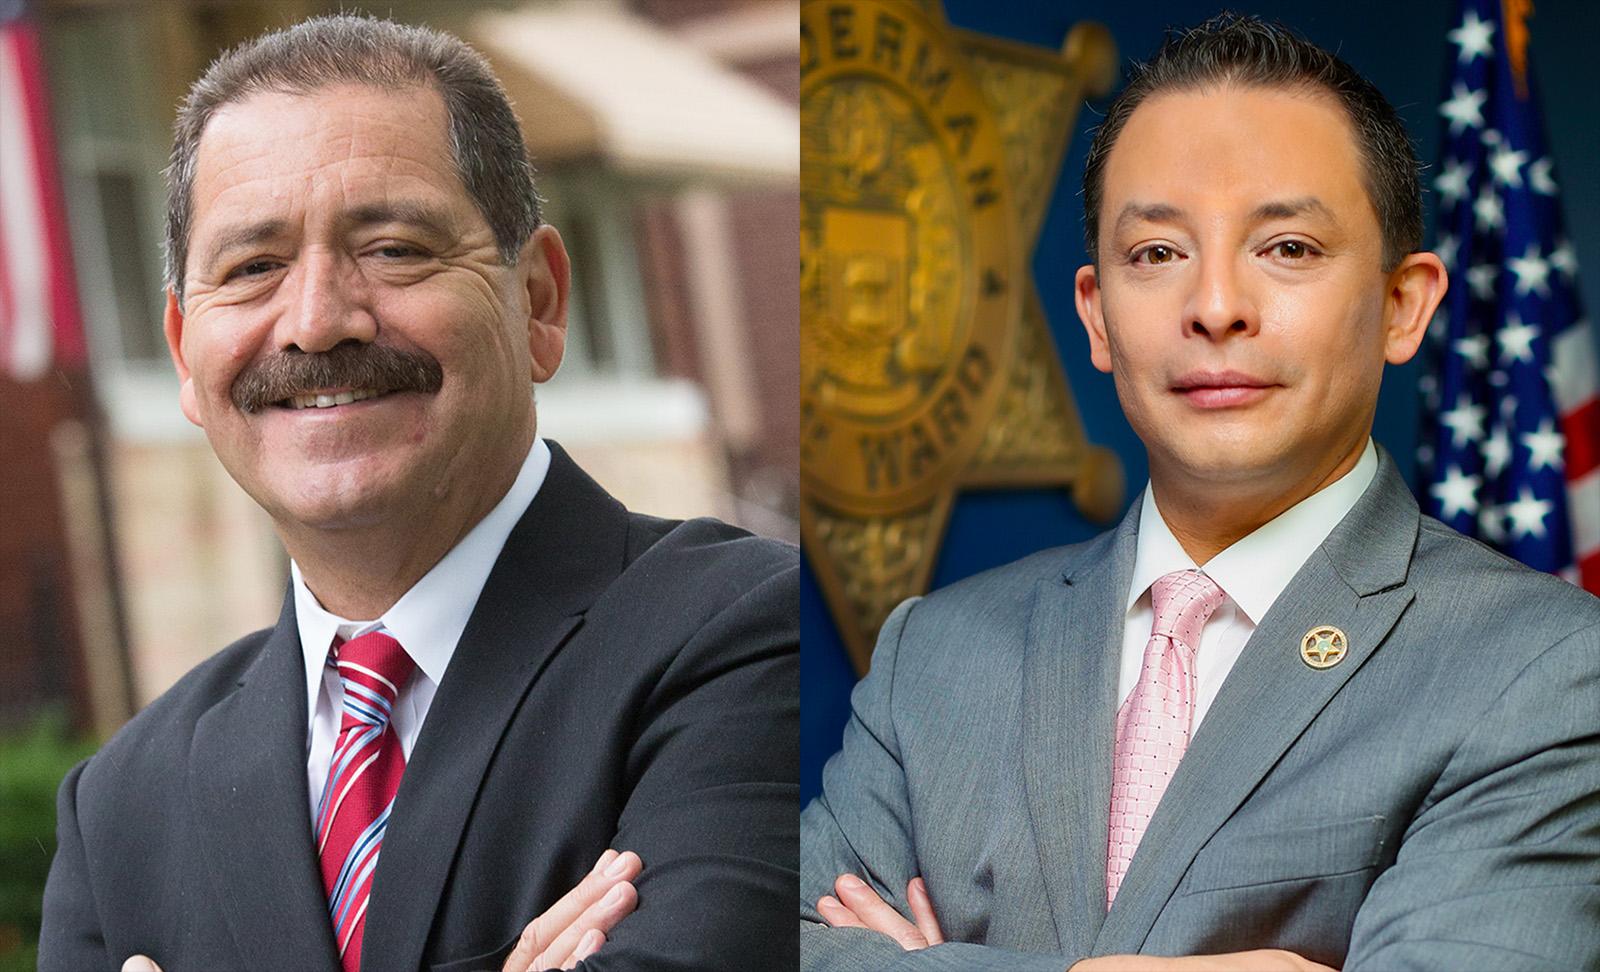 Rep. Jesus “Chuy” García is being challenged by Chicago Ald. Ray Lopez in the 4th Congressional District. (Campaign photos) 